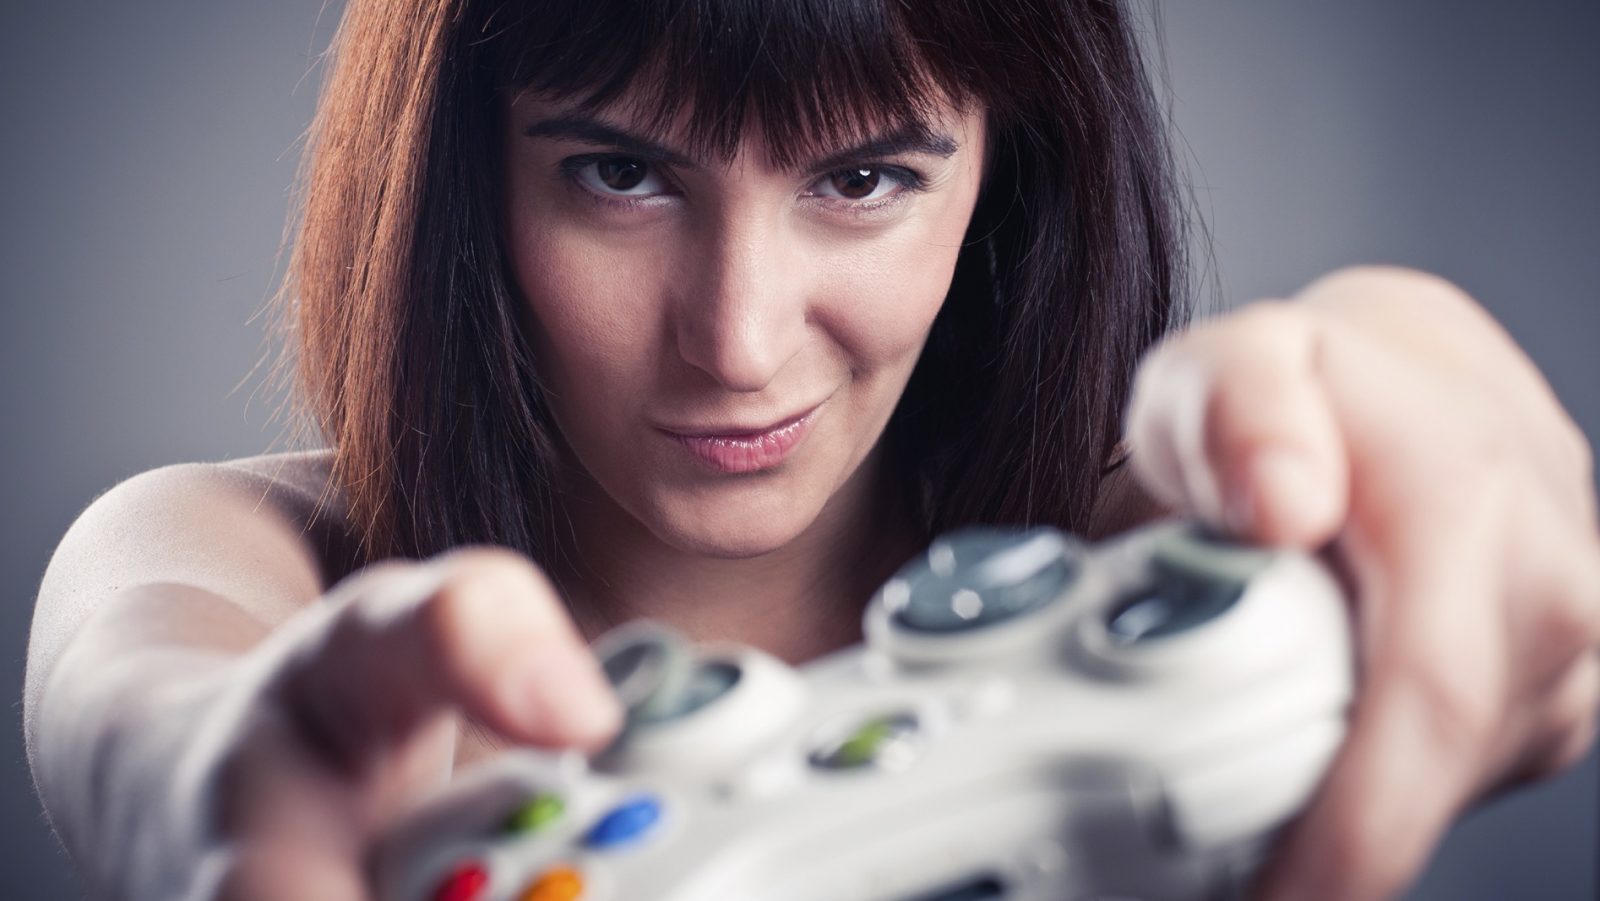 How wrong are we about the gaming gender divide?